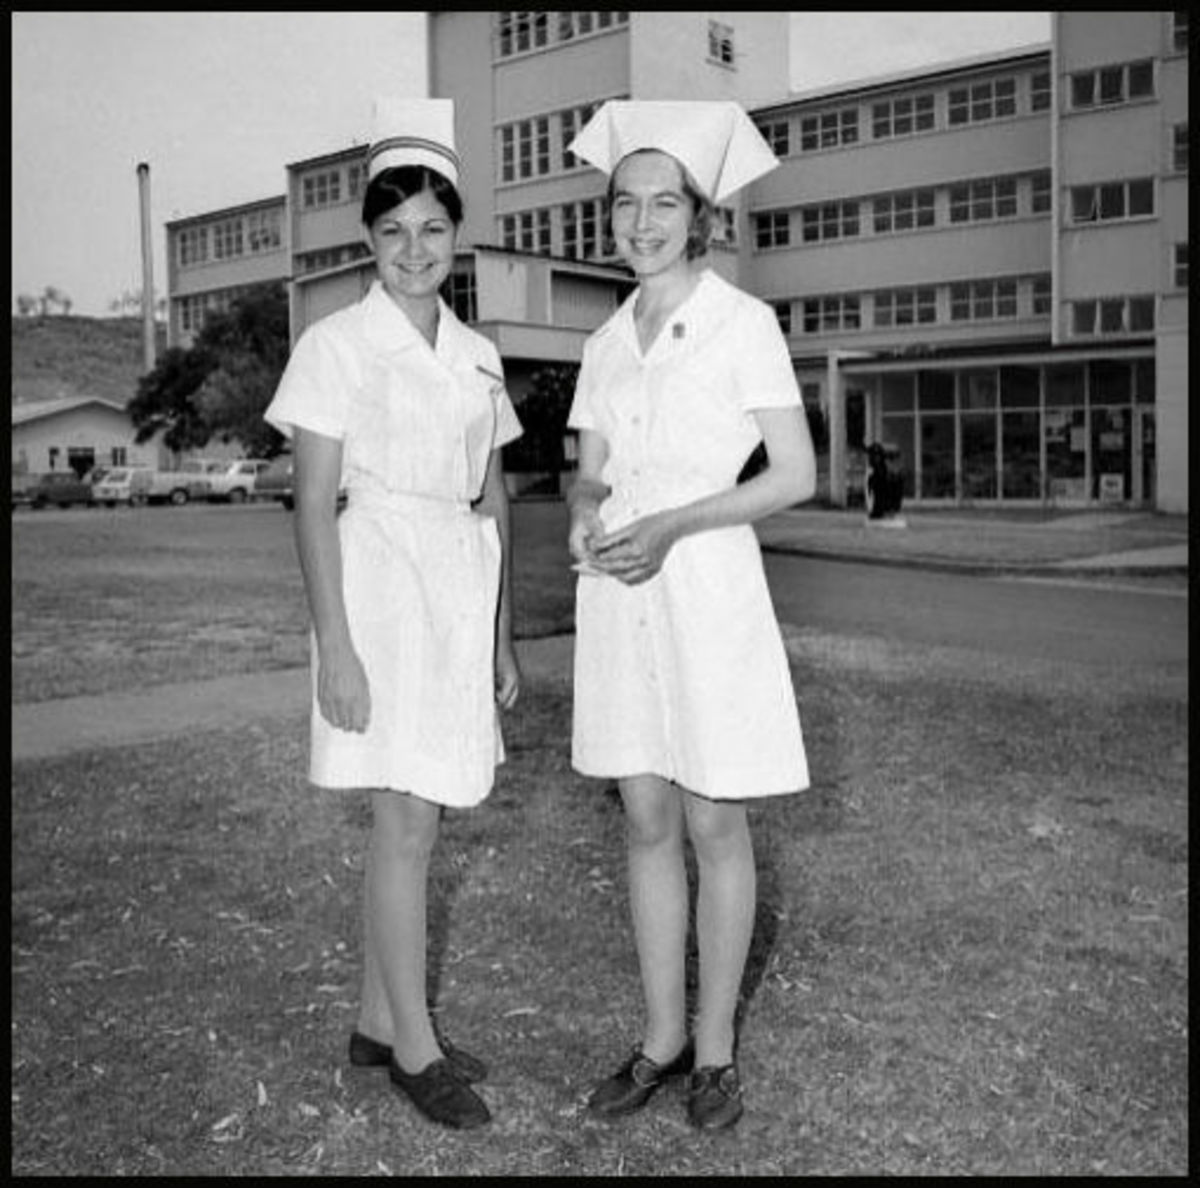 My best childhood friend and I wanted to be nurses.